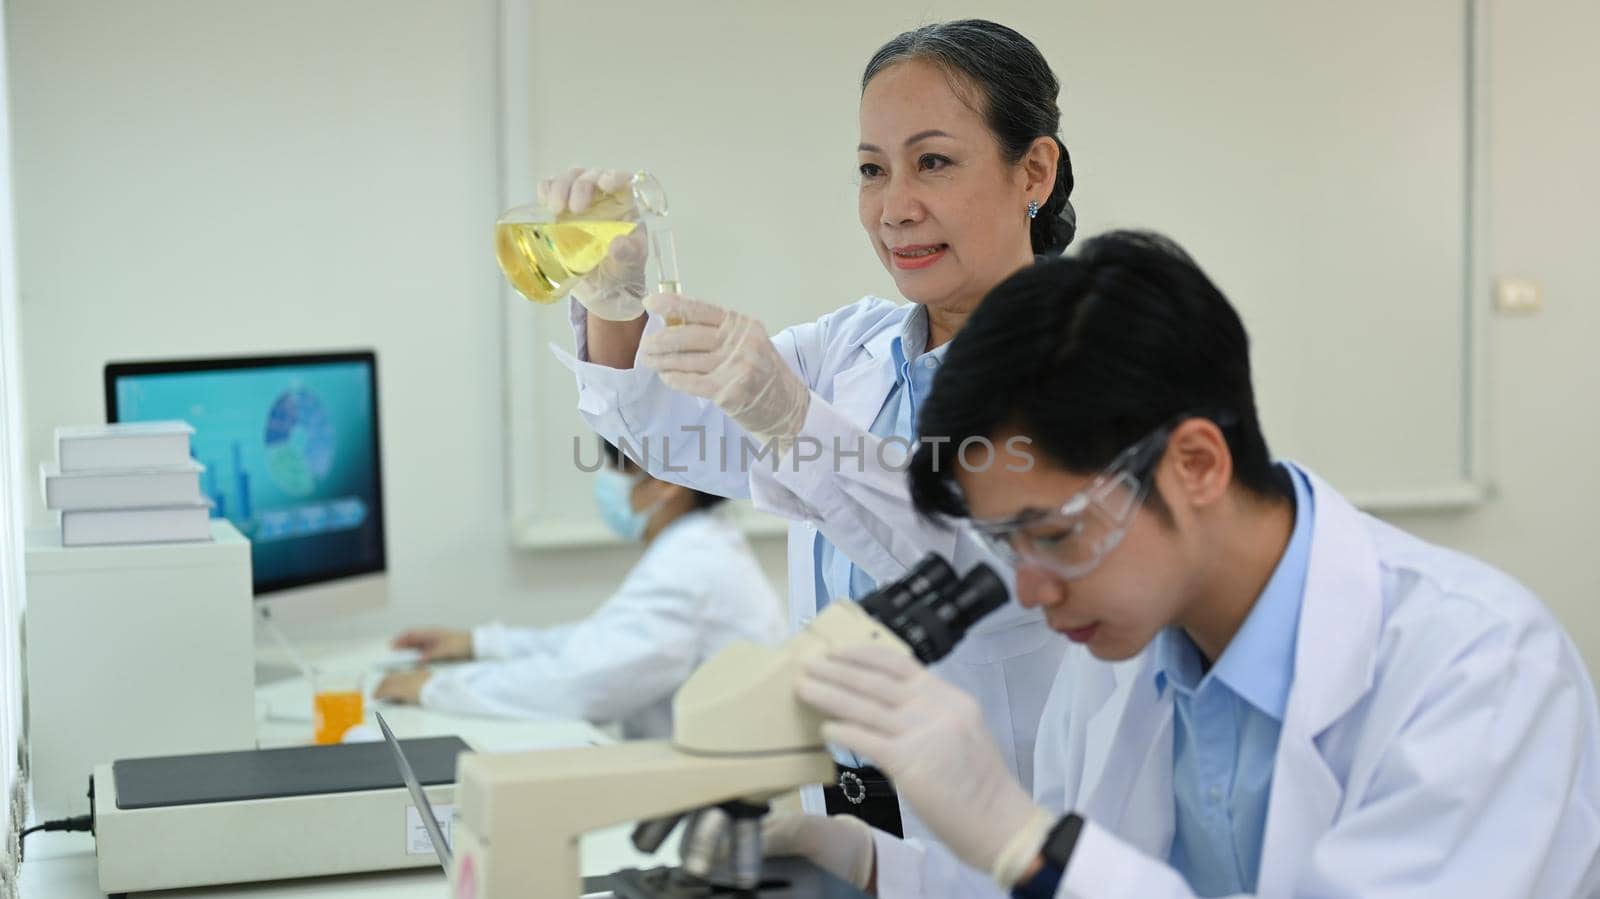 Senior female scientist in white coat examining samples and liquid in laboratory. Medicine and science researching concepts.